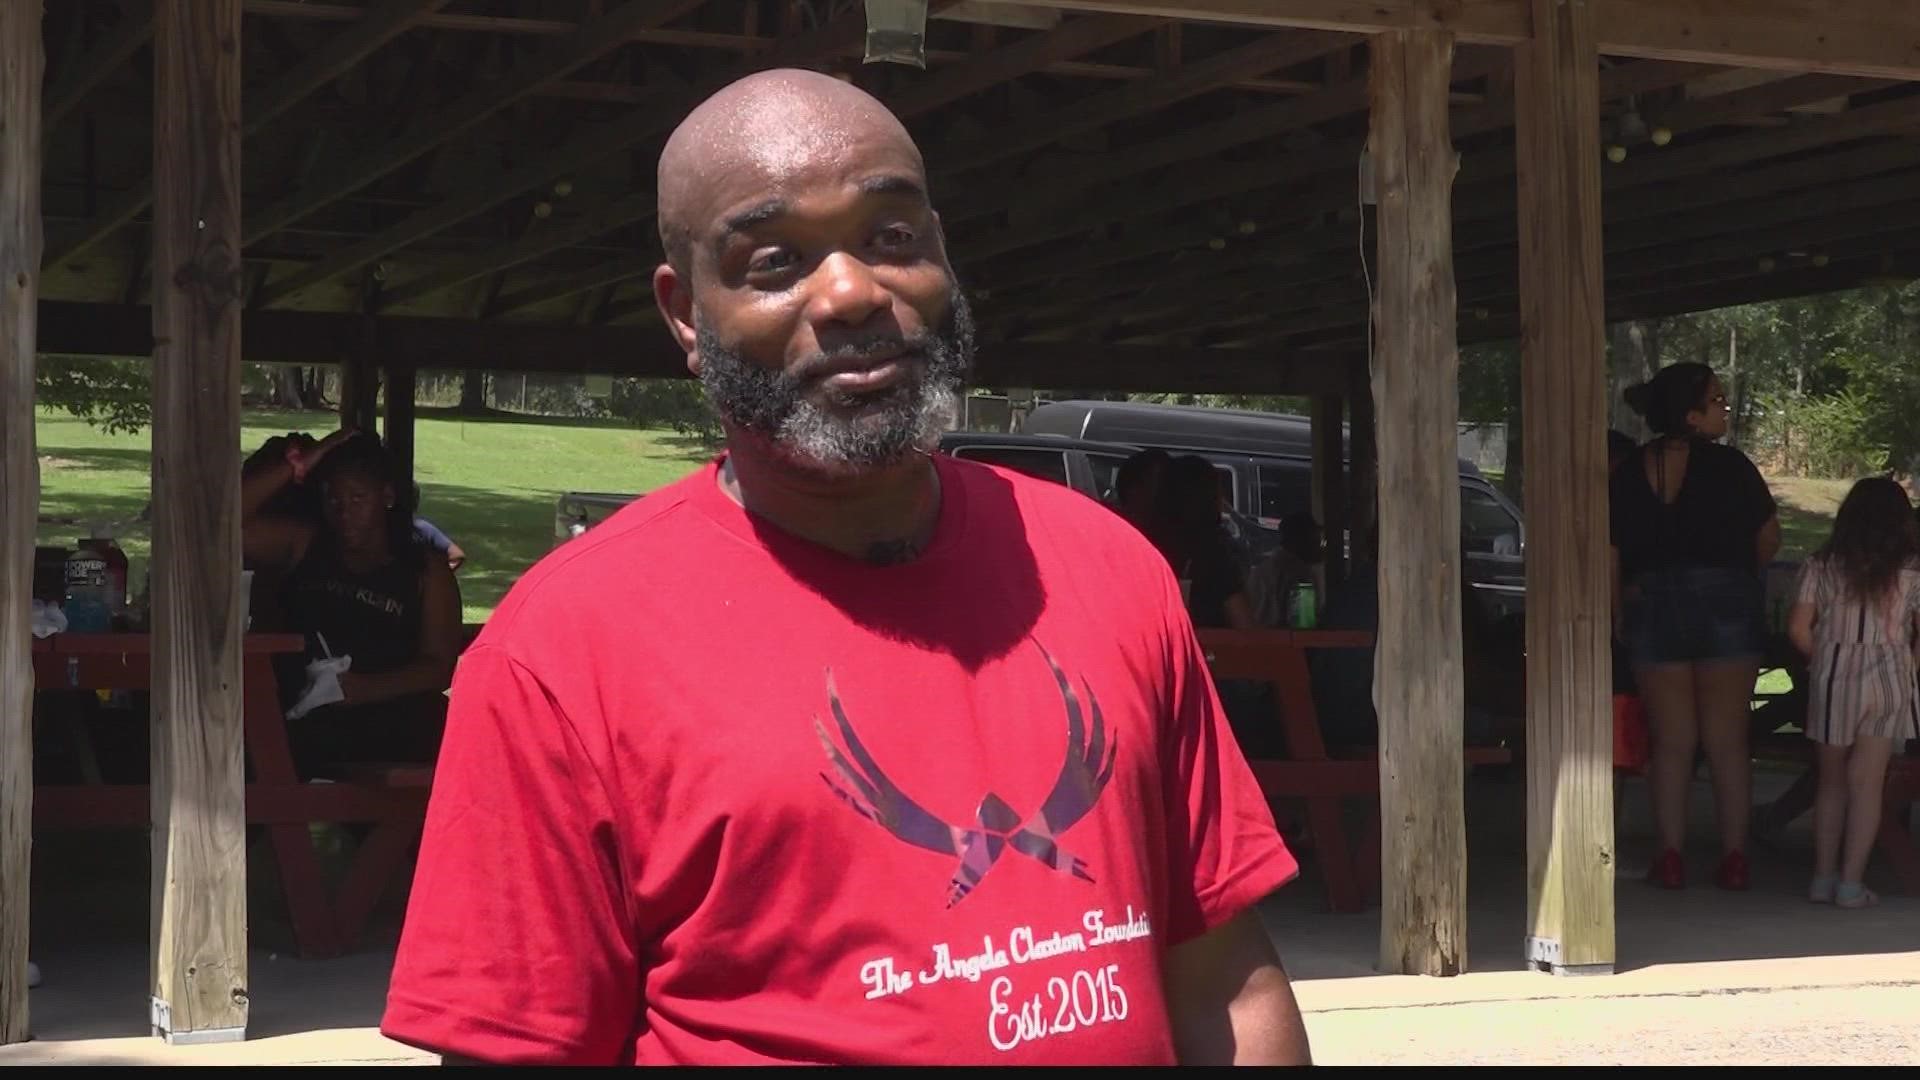 Jerome Wallace is this month's Neighborhood Hero. Wallace is the founder of a local nonprofit - The Angela Claxton Foundation.